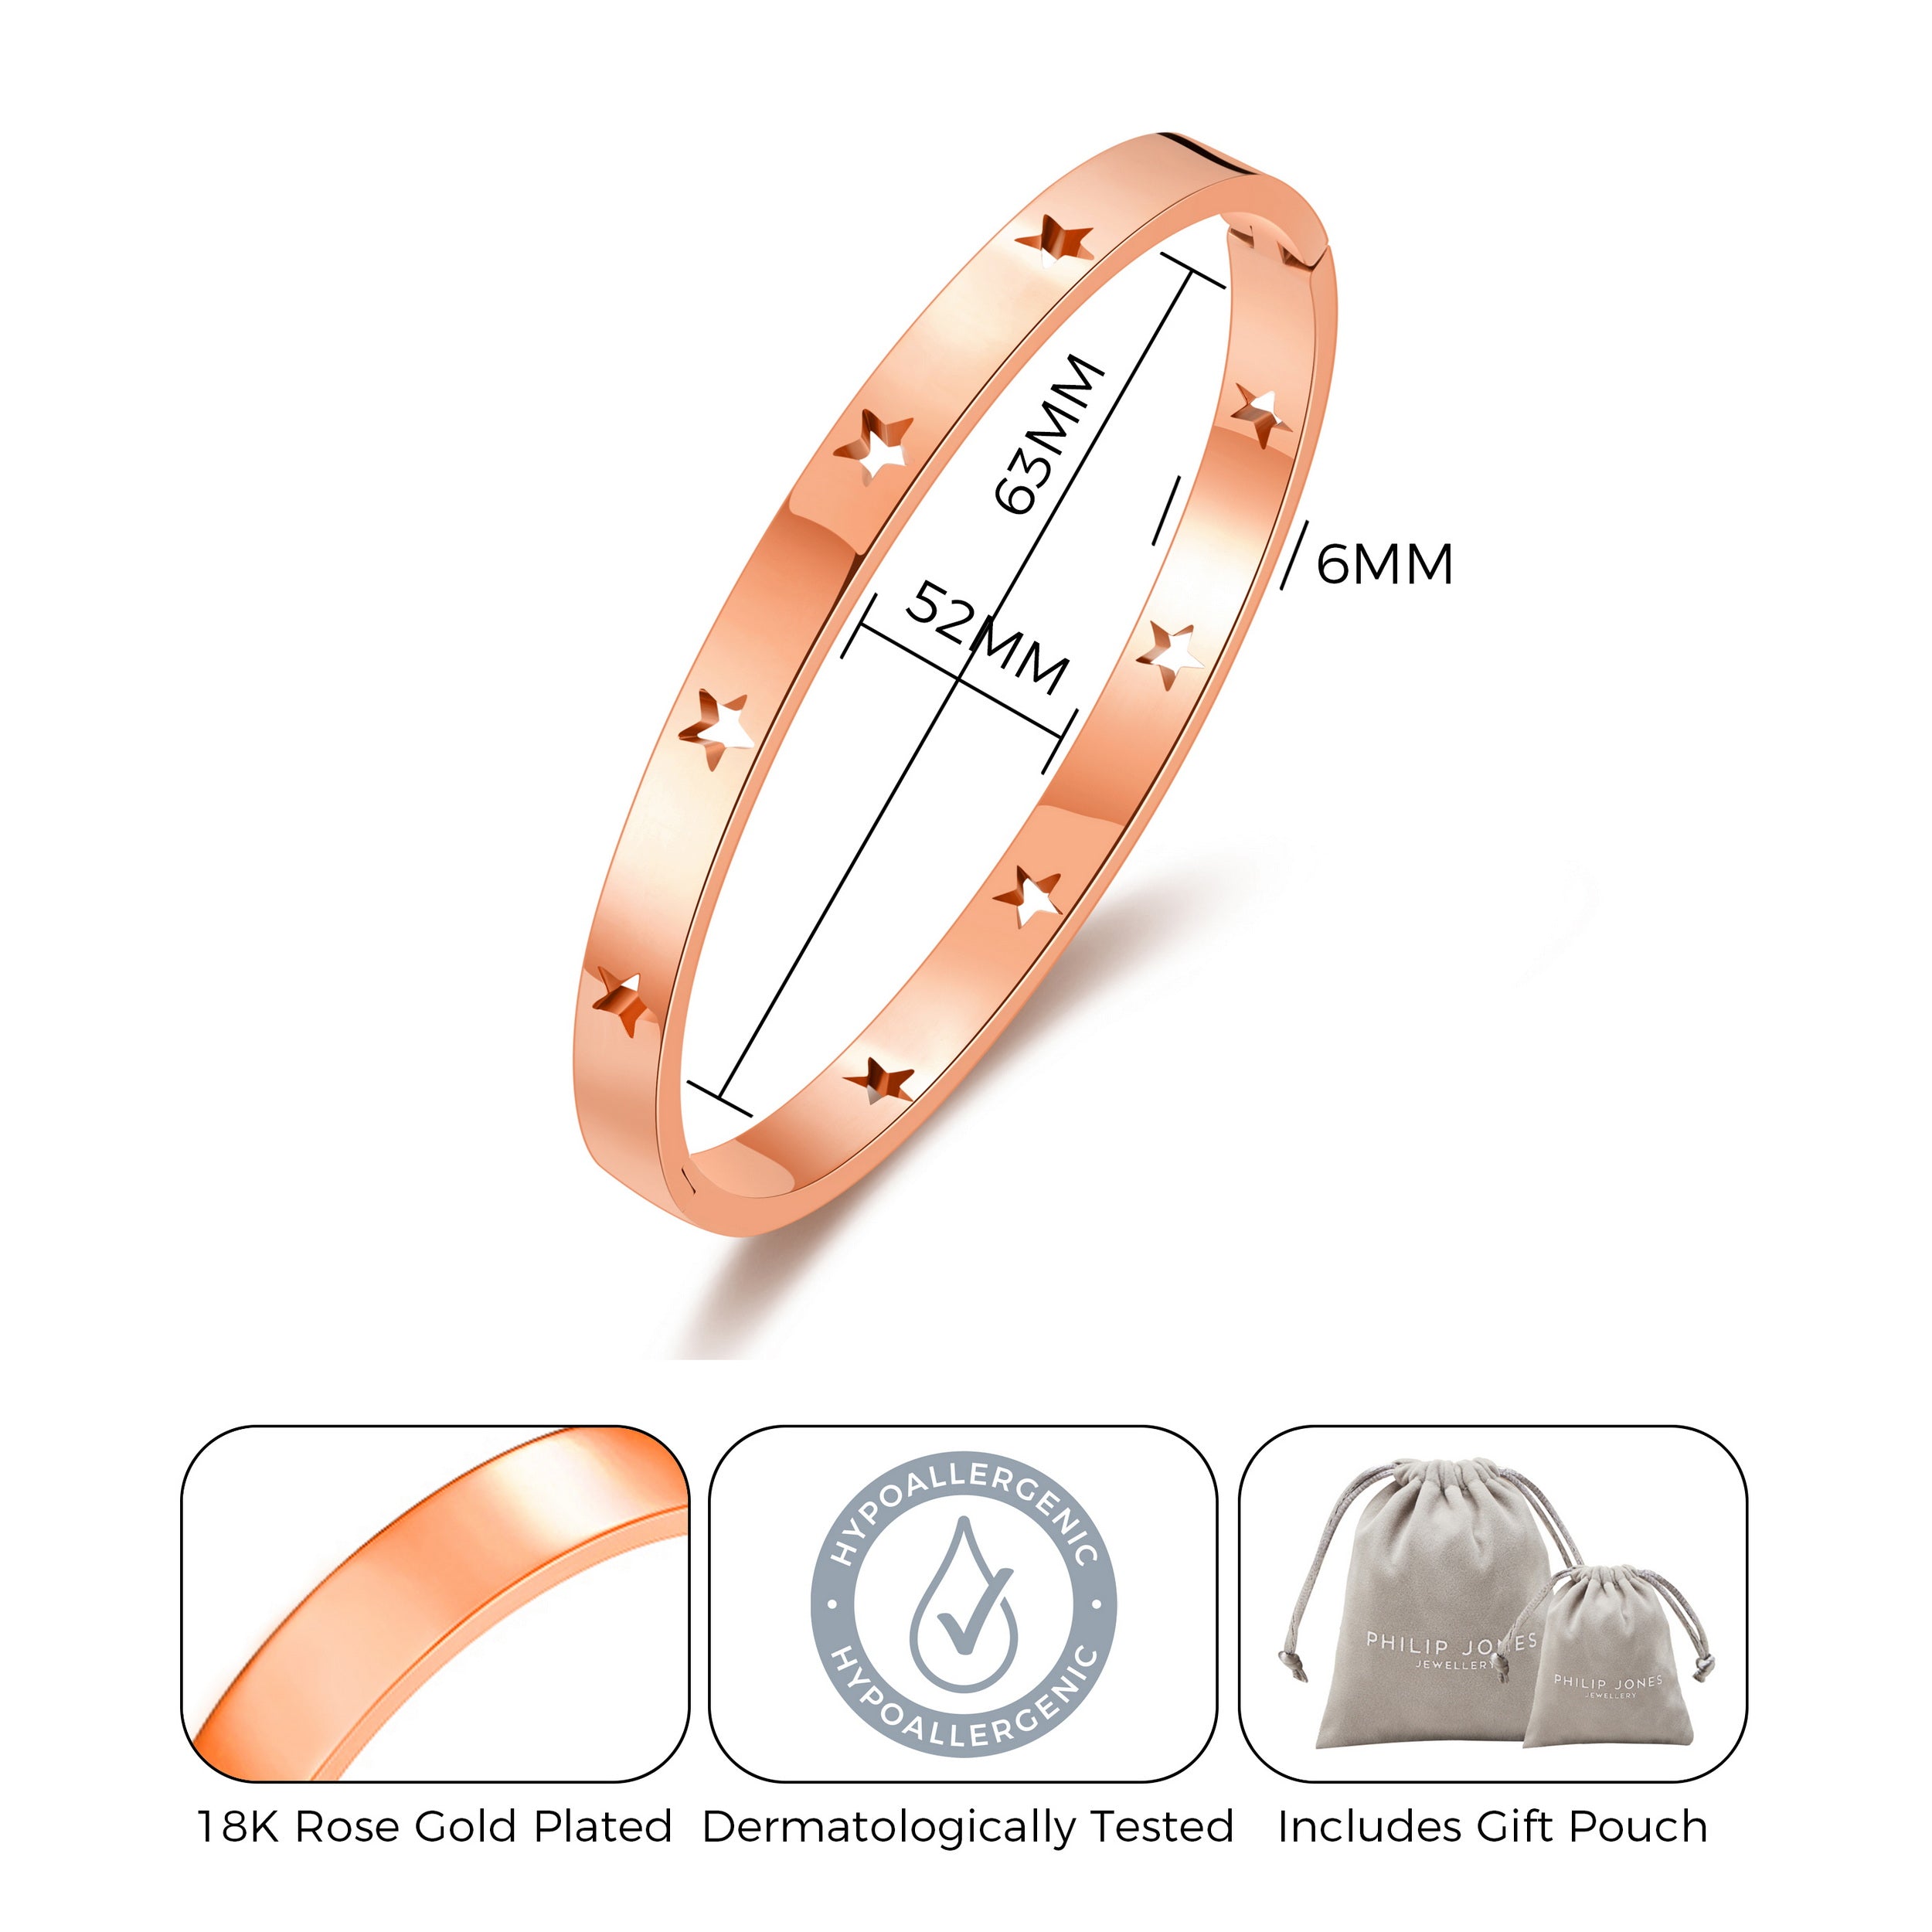 Rose Gold Plated Stainless Steel Star Bangle